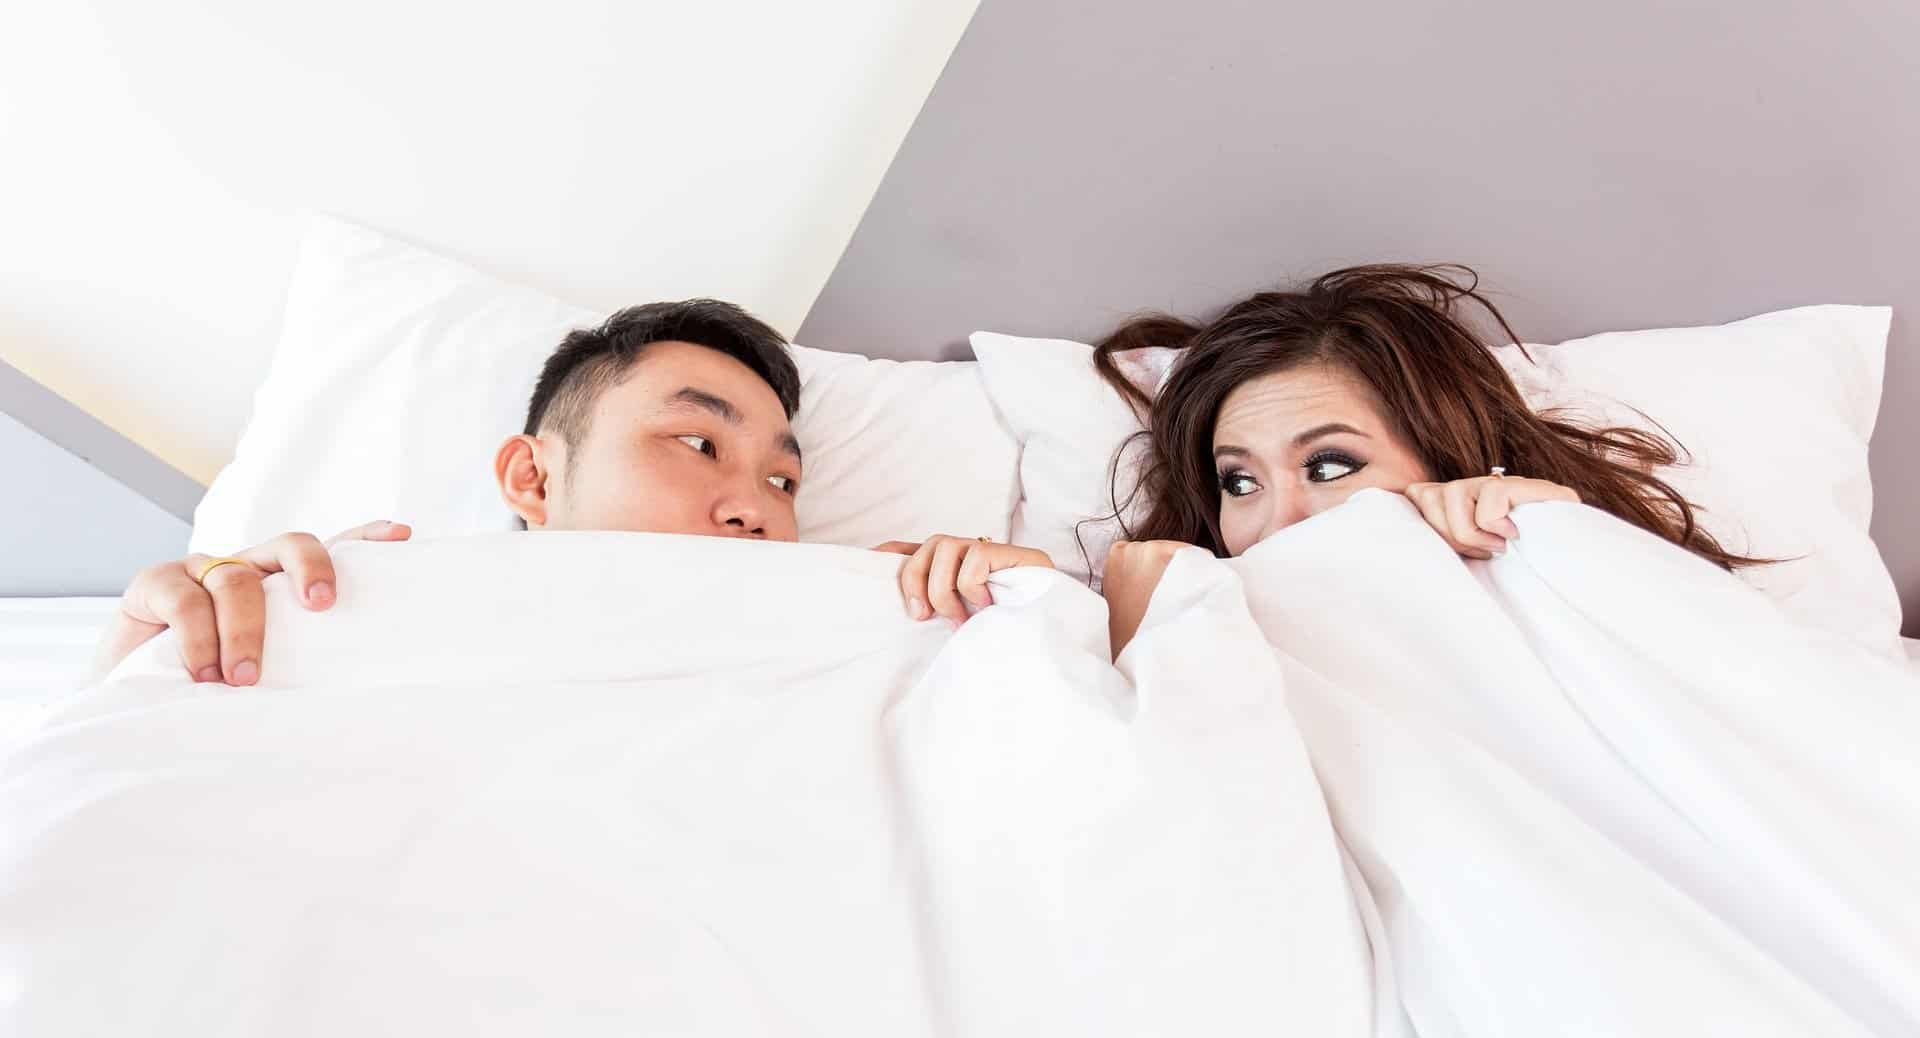 5 ingredients for Sex that can Spice up your Marriage — by Joyce Tan